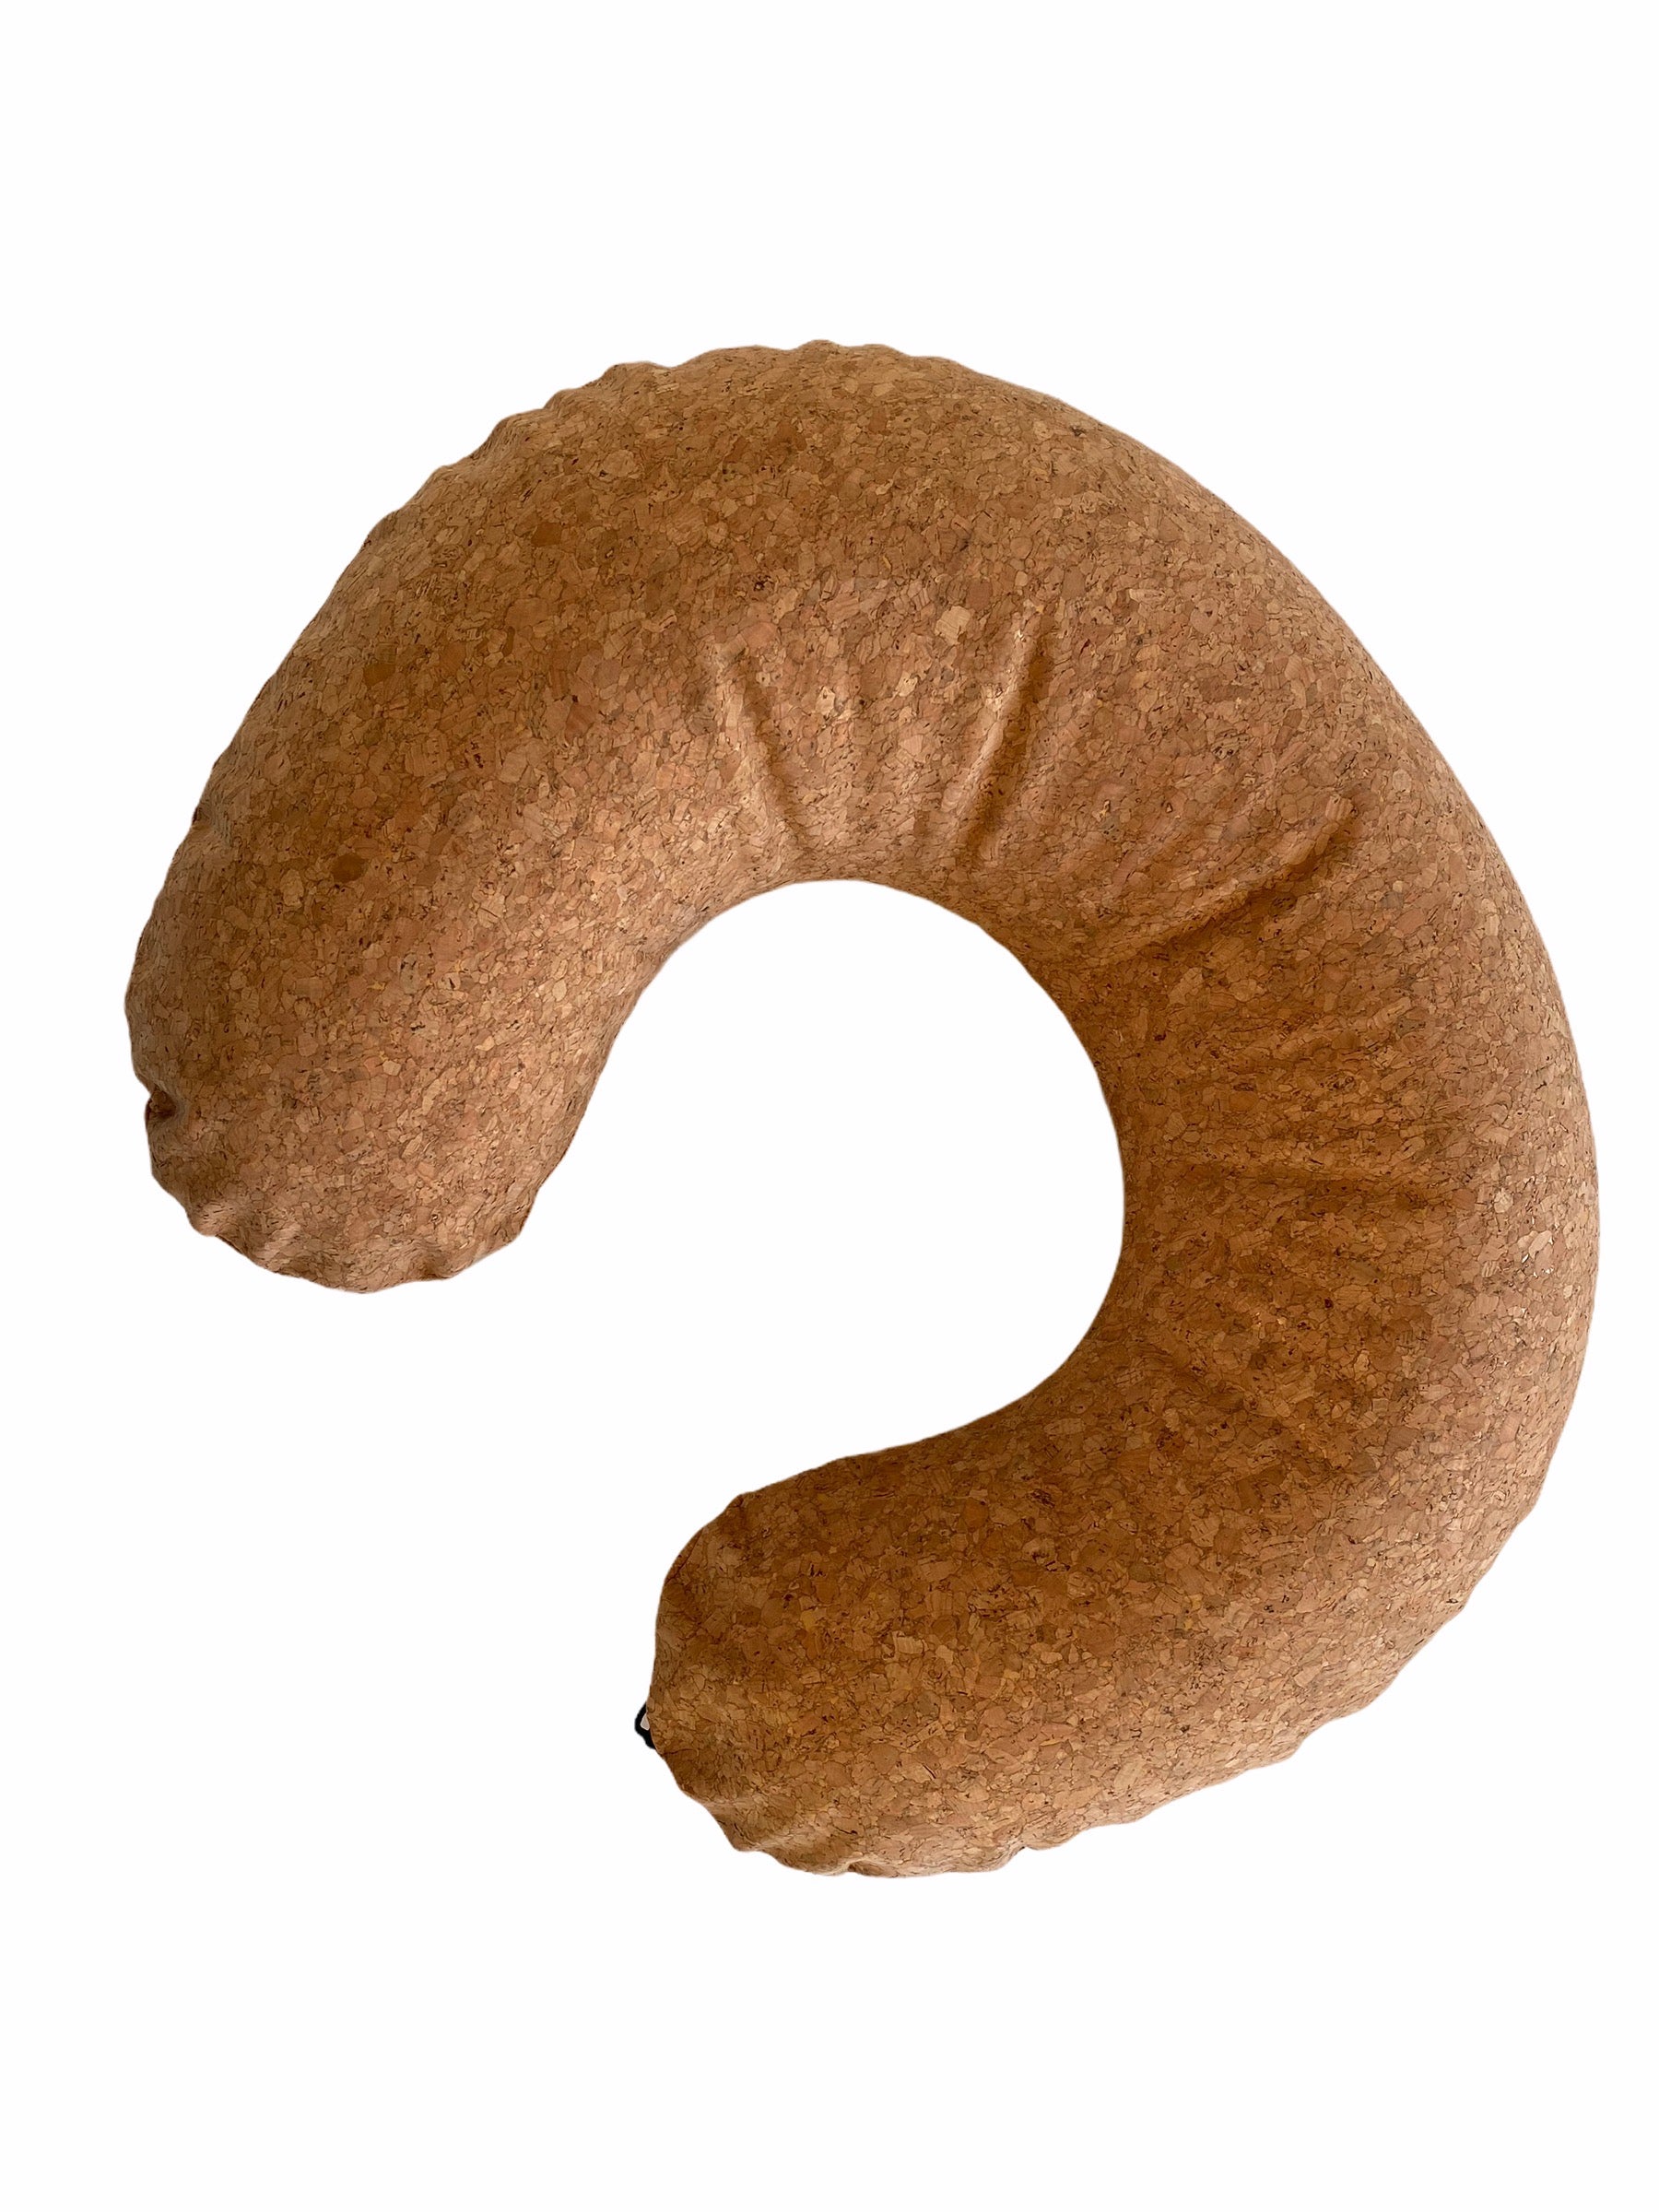 Inflatable nursing pillow in natural cork